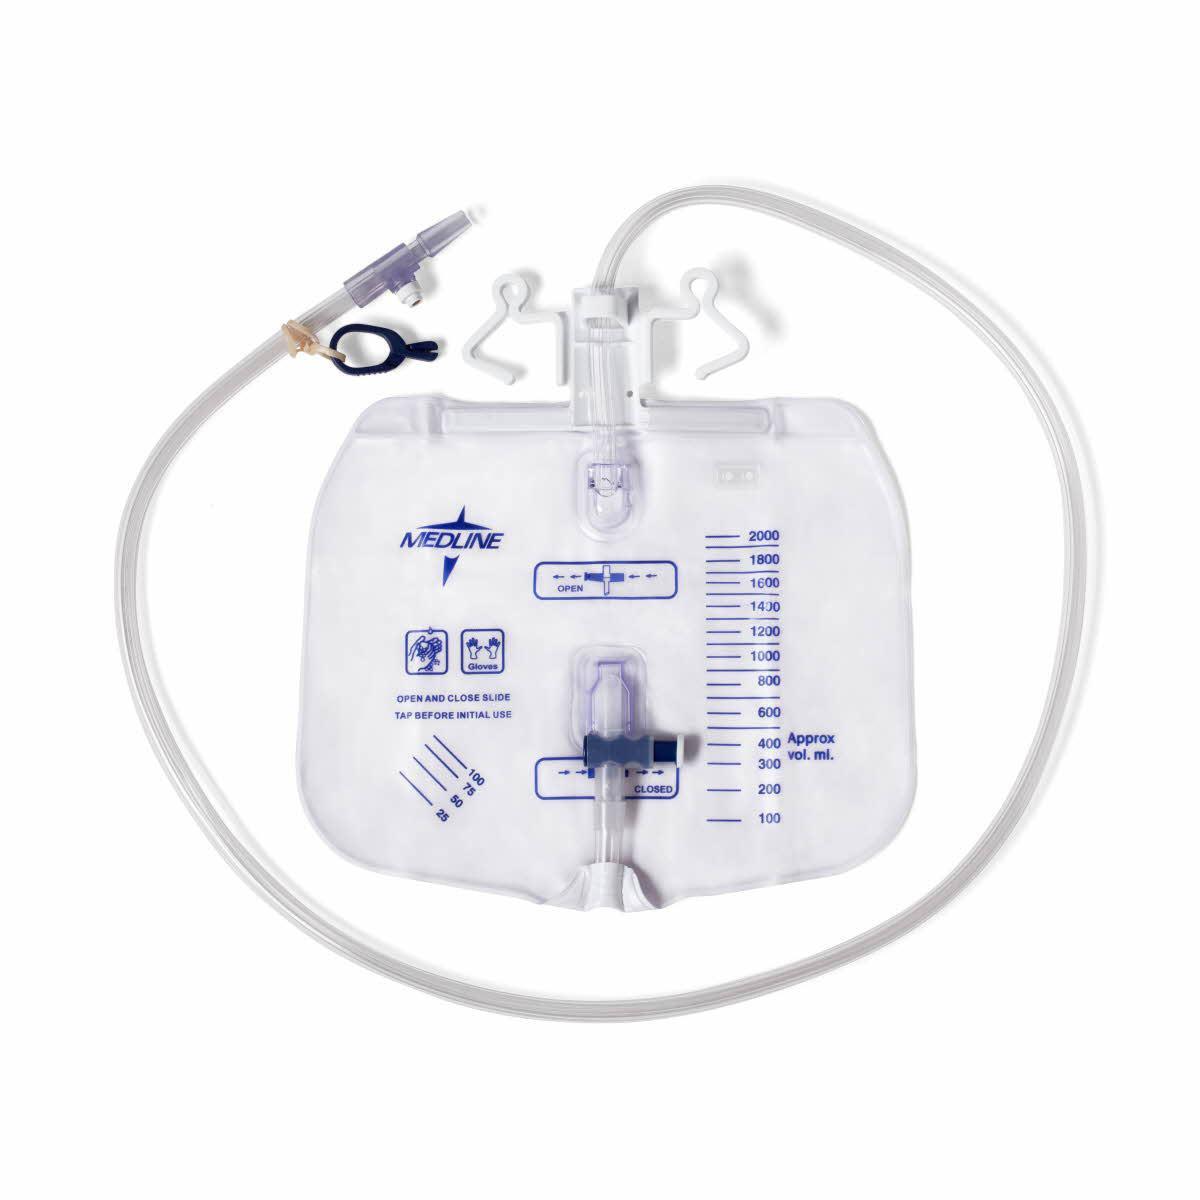 Urinary Drainage Bag 2000 ml with Anti-Reflux Tower